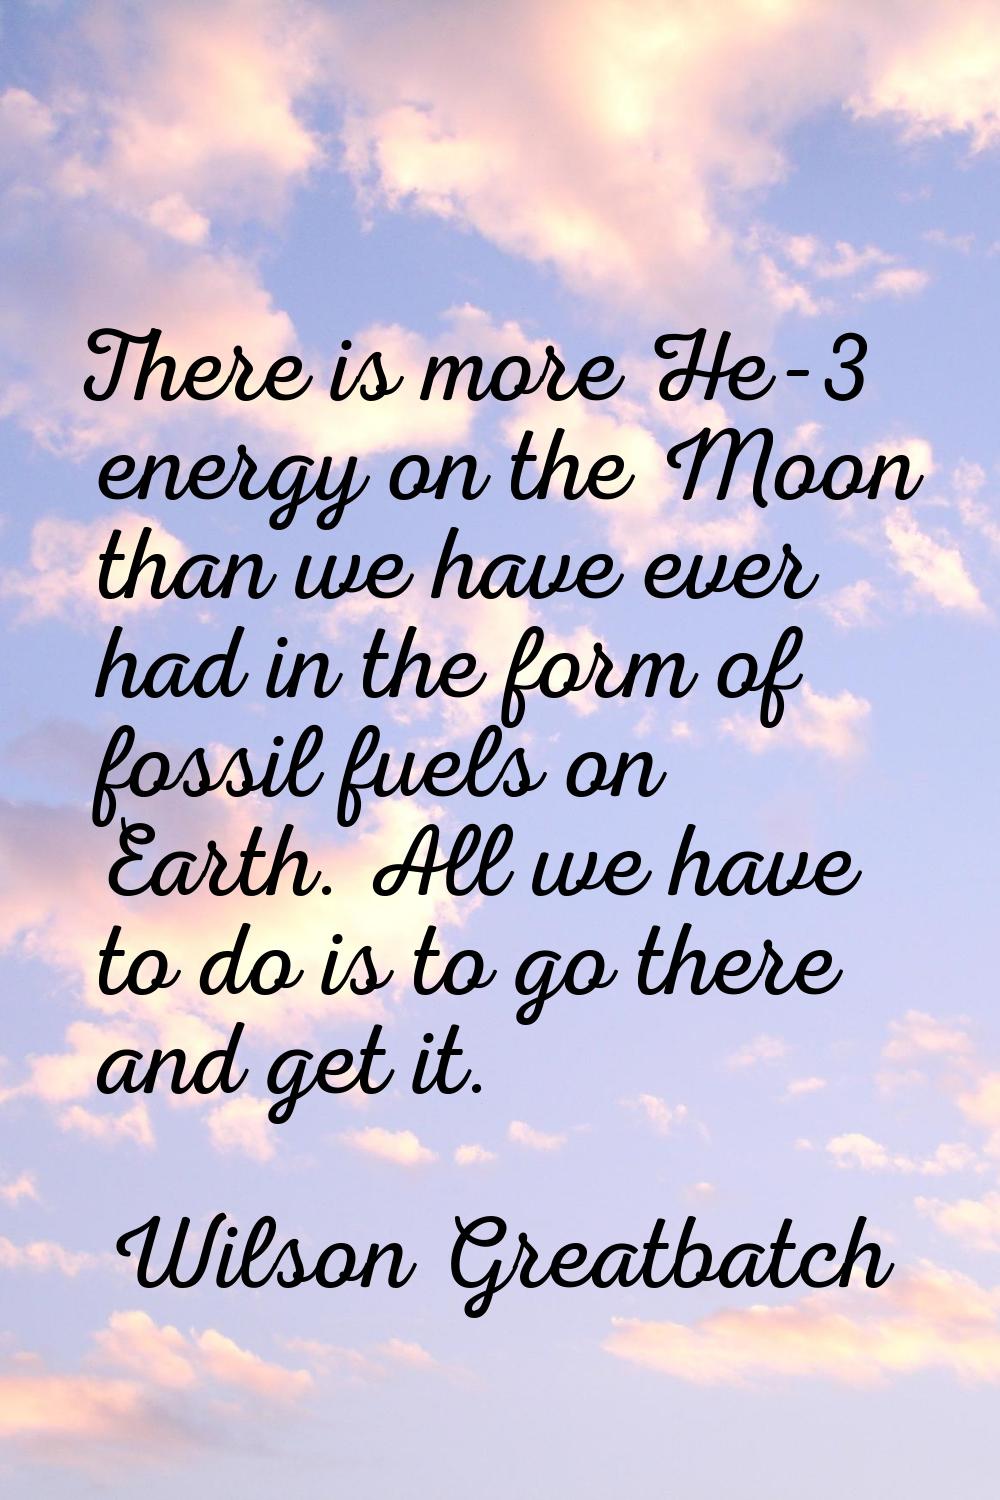 There is more He-3 energy on the Moon than we have ever had in the form of fossil fuels on Earth. A